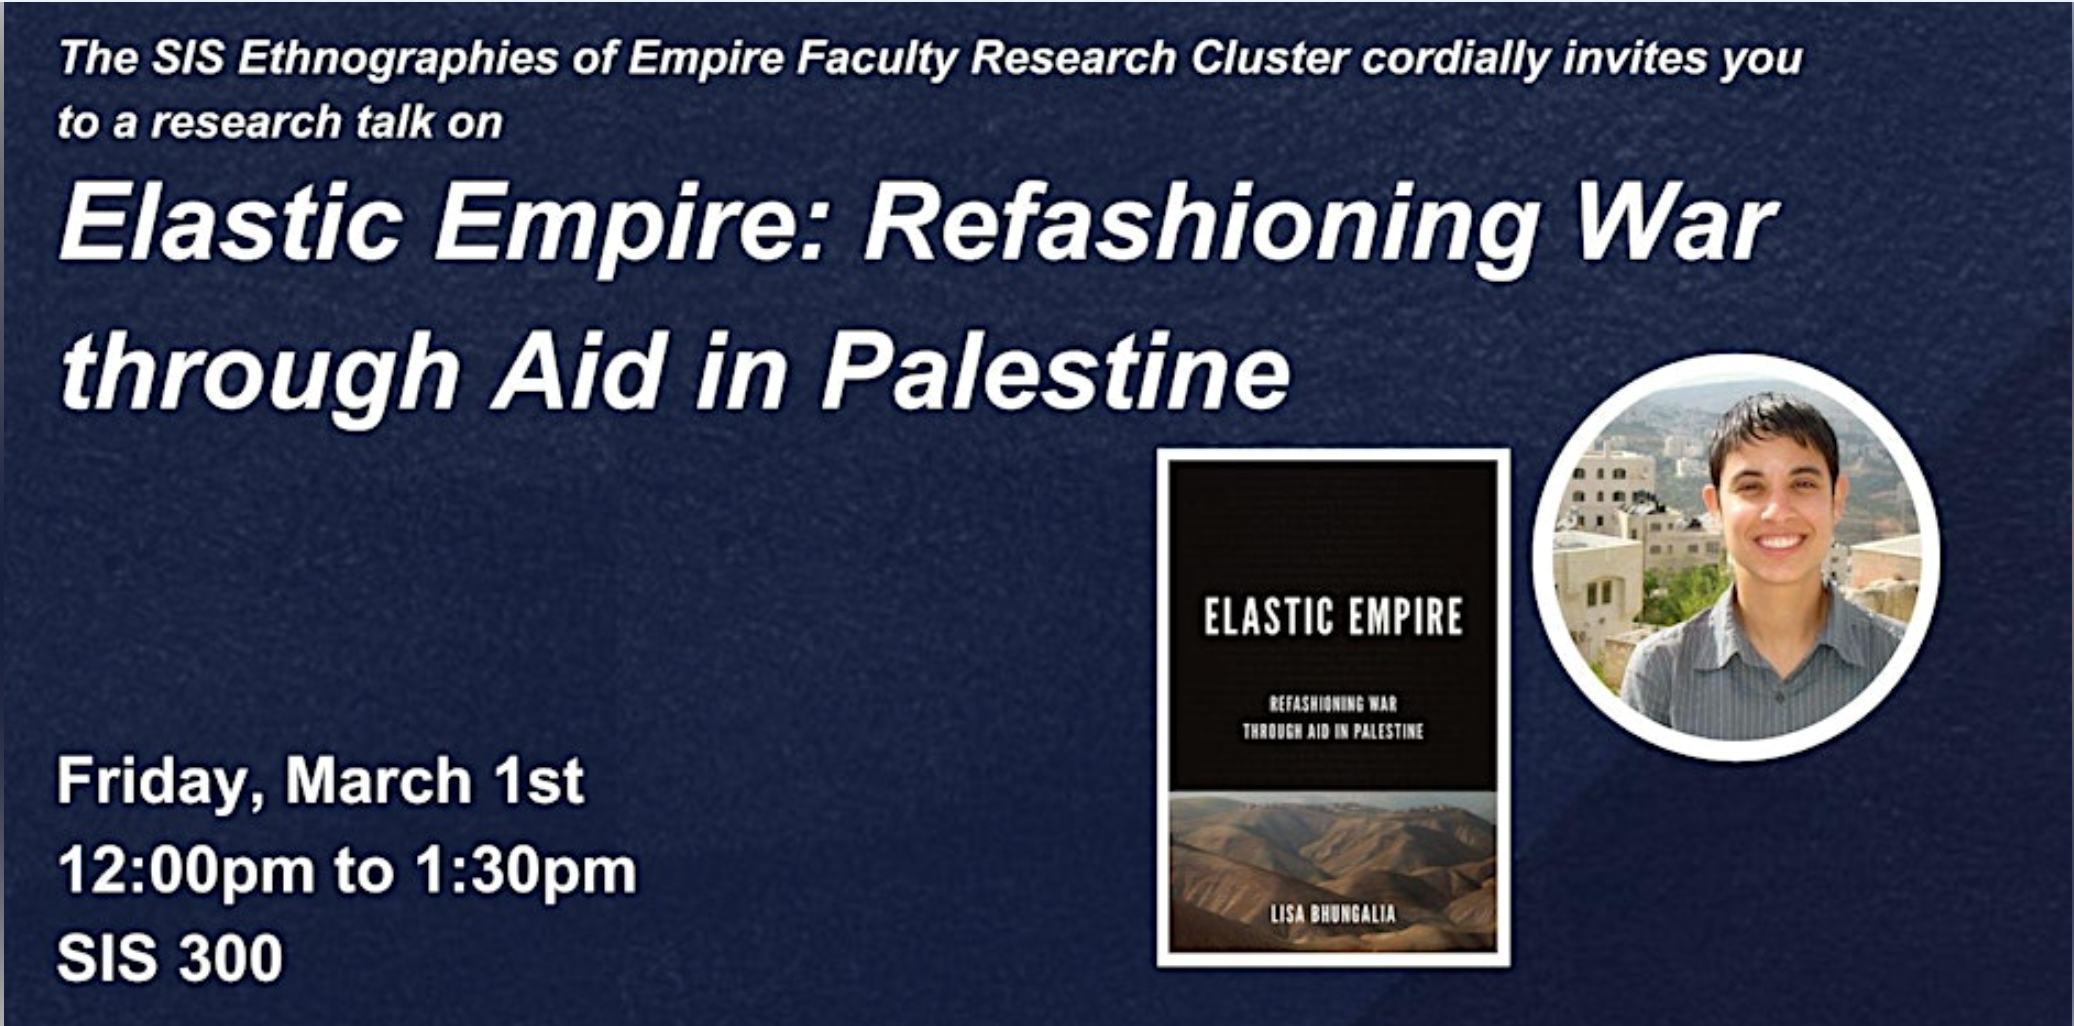 EoE Research Talk on "Elastic Empire": War and Aid in Palestine.